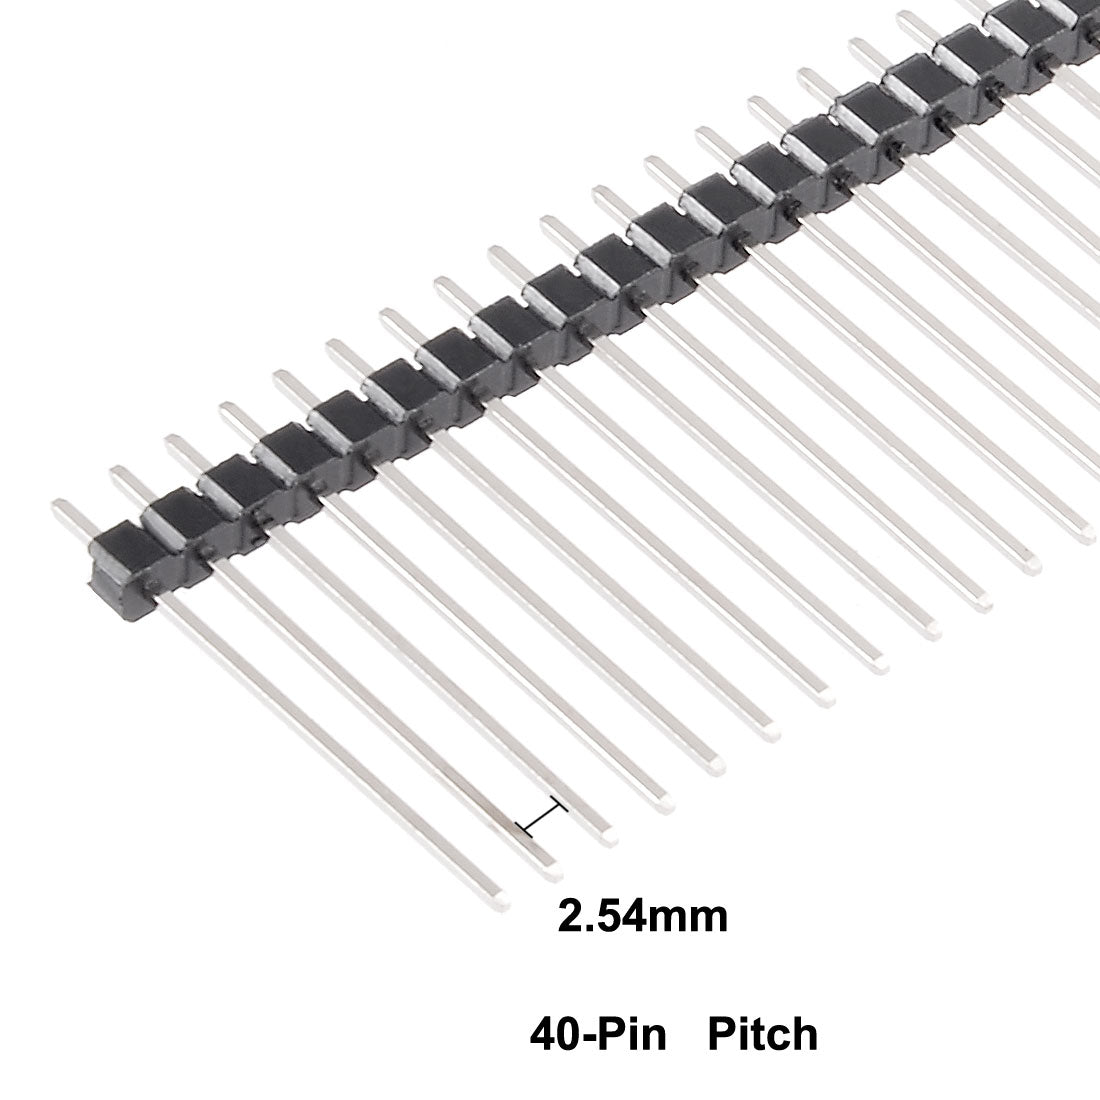 uxcell Uxcell 30Pcs 2.54mm Pitch 40-Pin 28mm Length Single Row Straight Connector Pin Header Strip for Arduino Prototype Shield